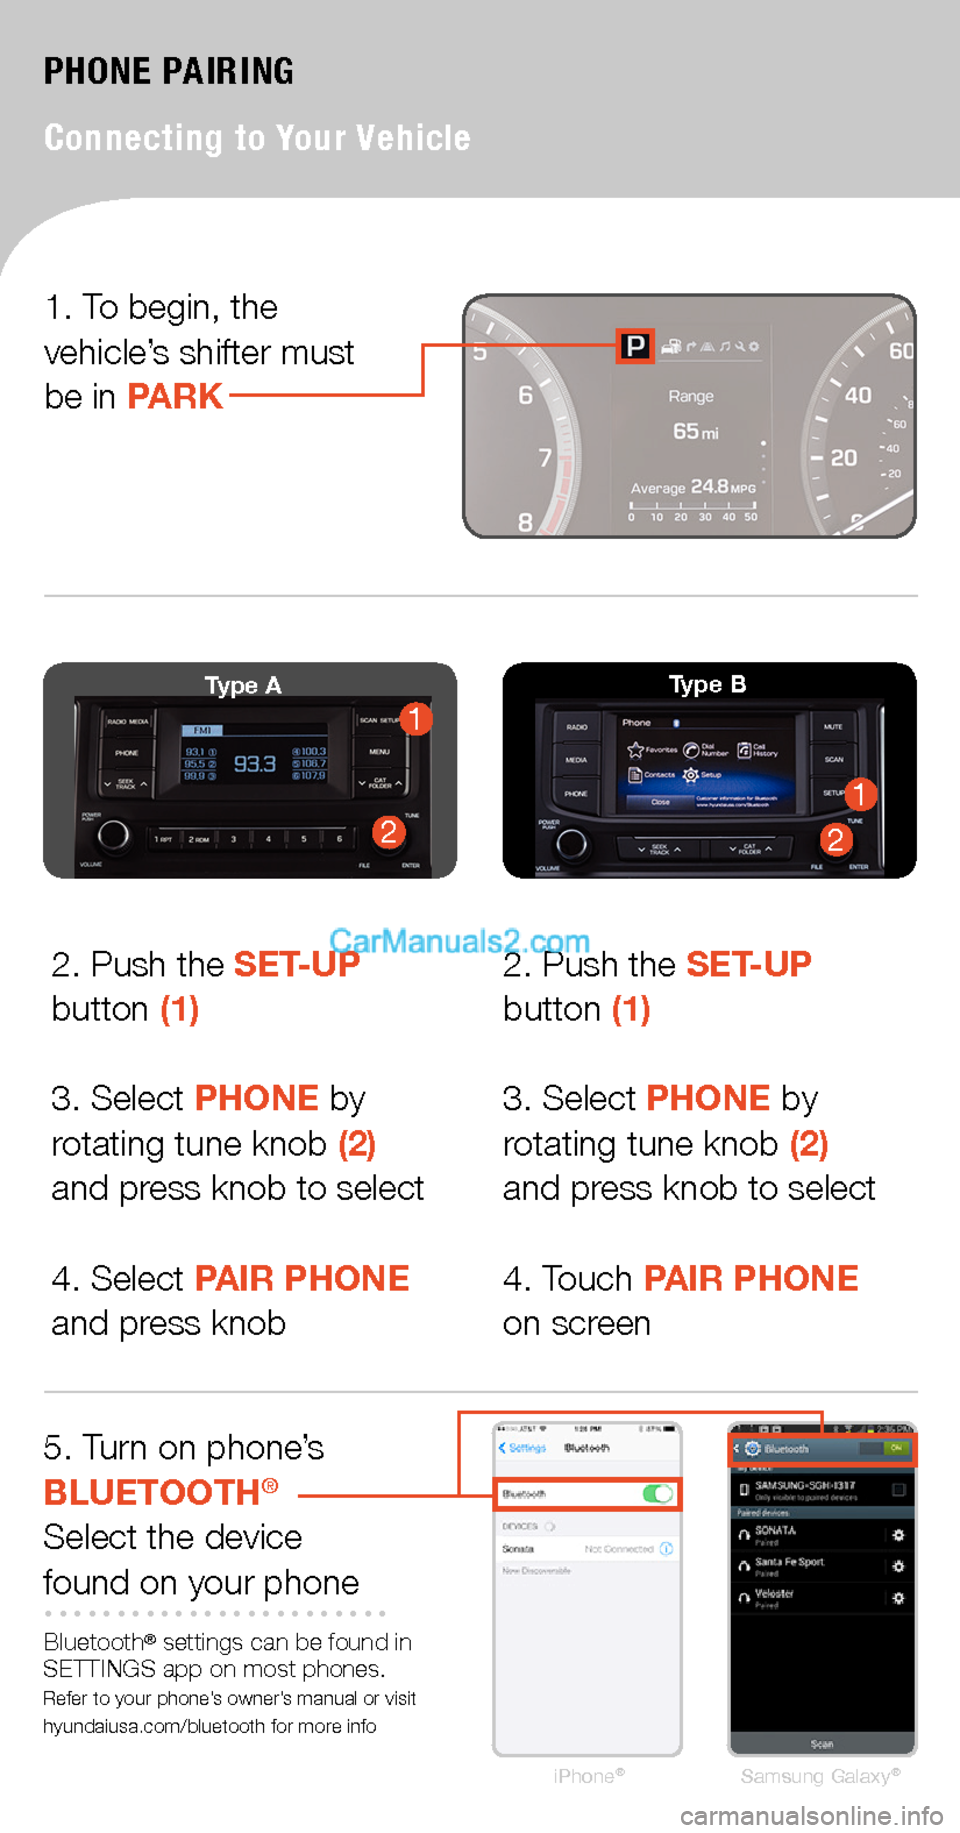 Hyundai Sonata 2015  Quick Tips iPhone®Samsung Galaxy®
PHONE PAIRING
Connecting to Your Vehicle
2
11Type A
211
Type B
2. Push the SET-UP  button (1)
3. Select PHONE by rotating tune knob (2)  and press knob to select
4. Select PAI